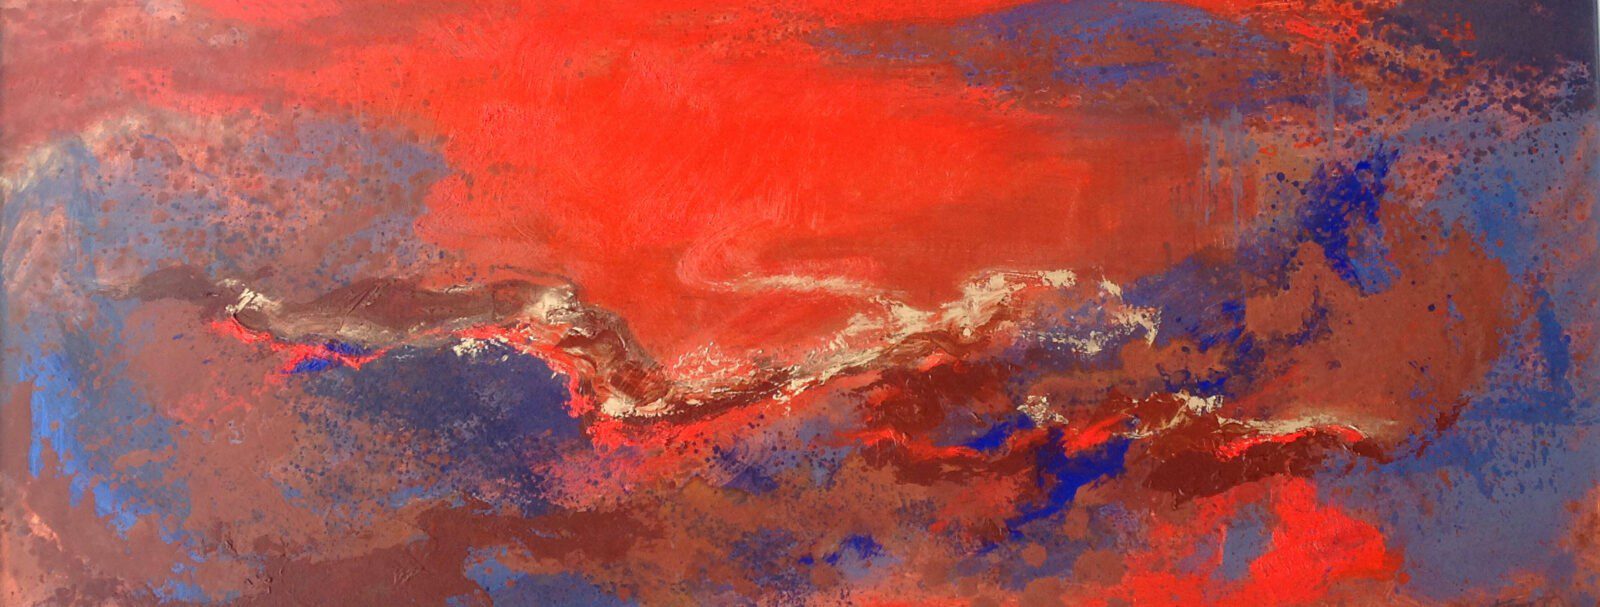 An abstract painting with red and blue colors.